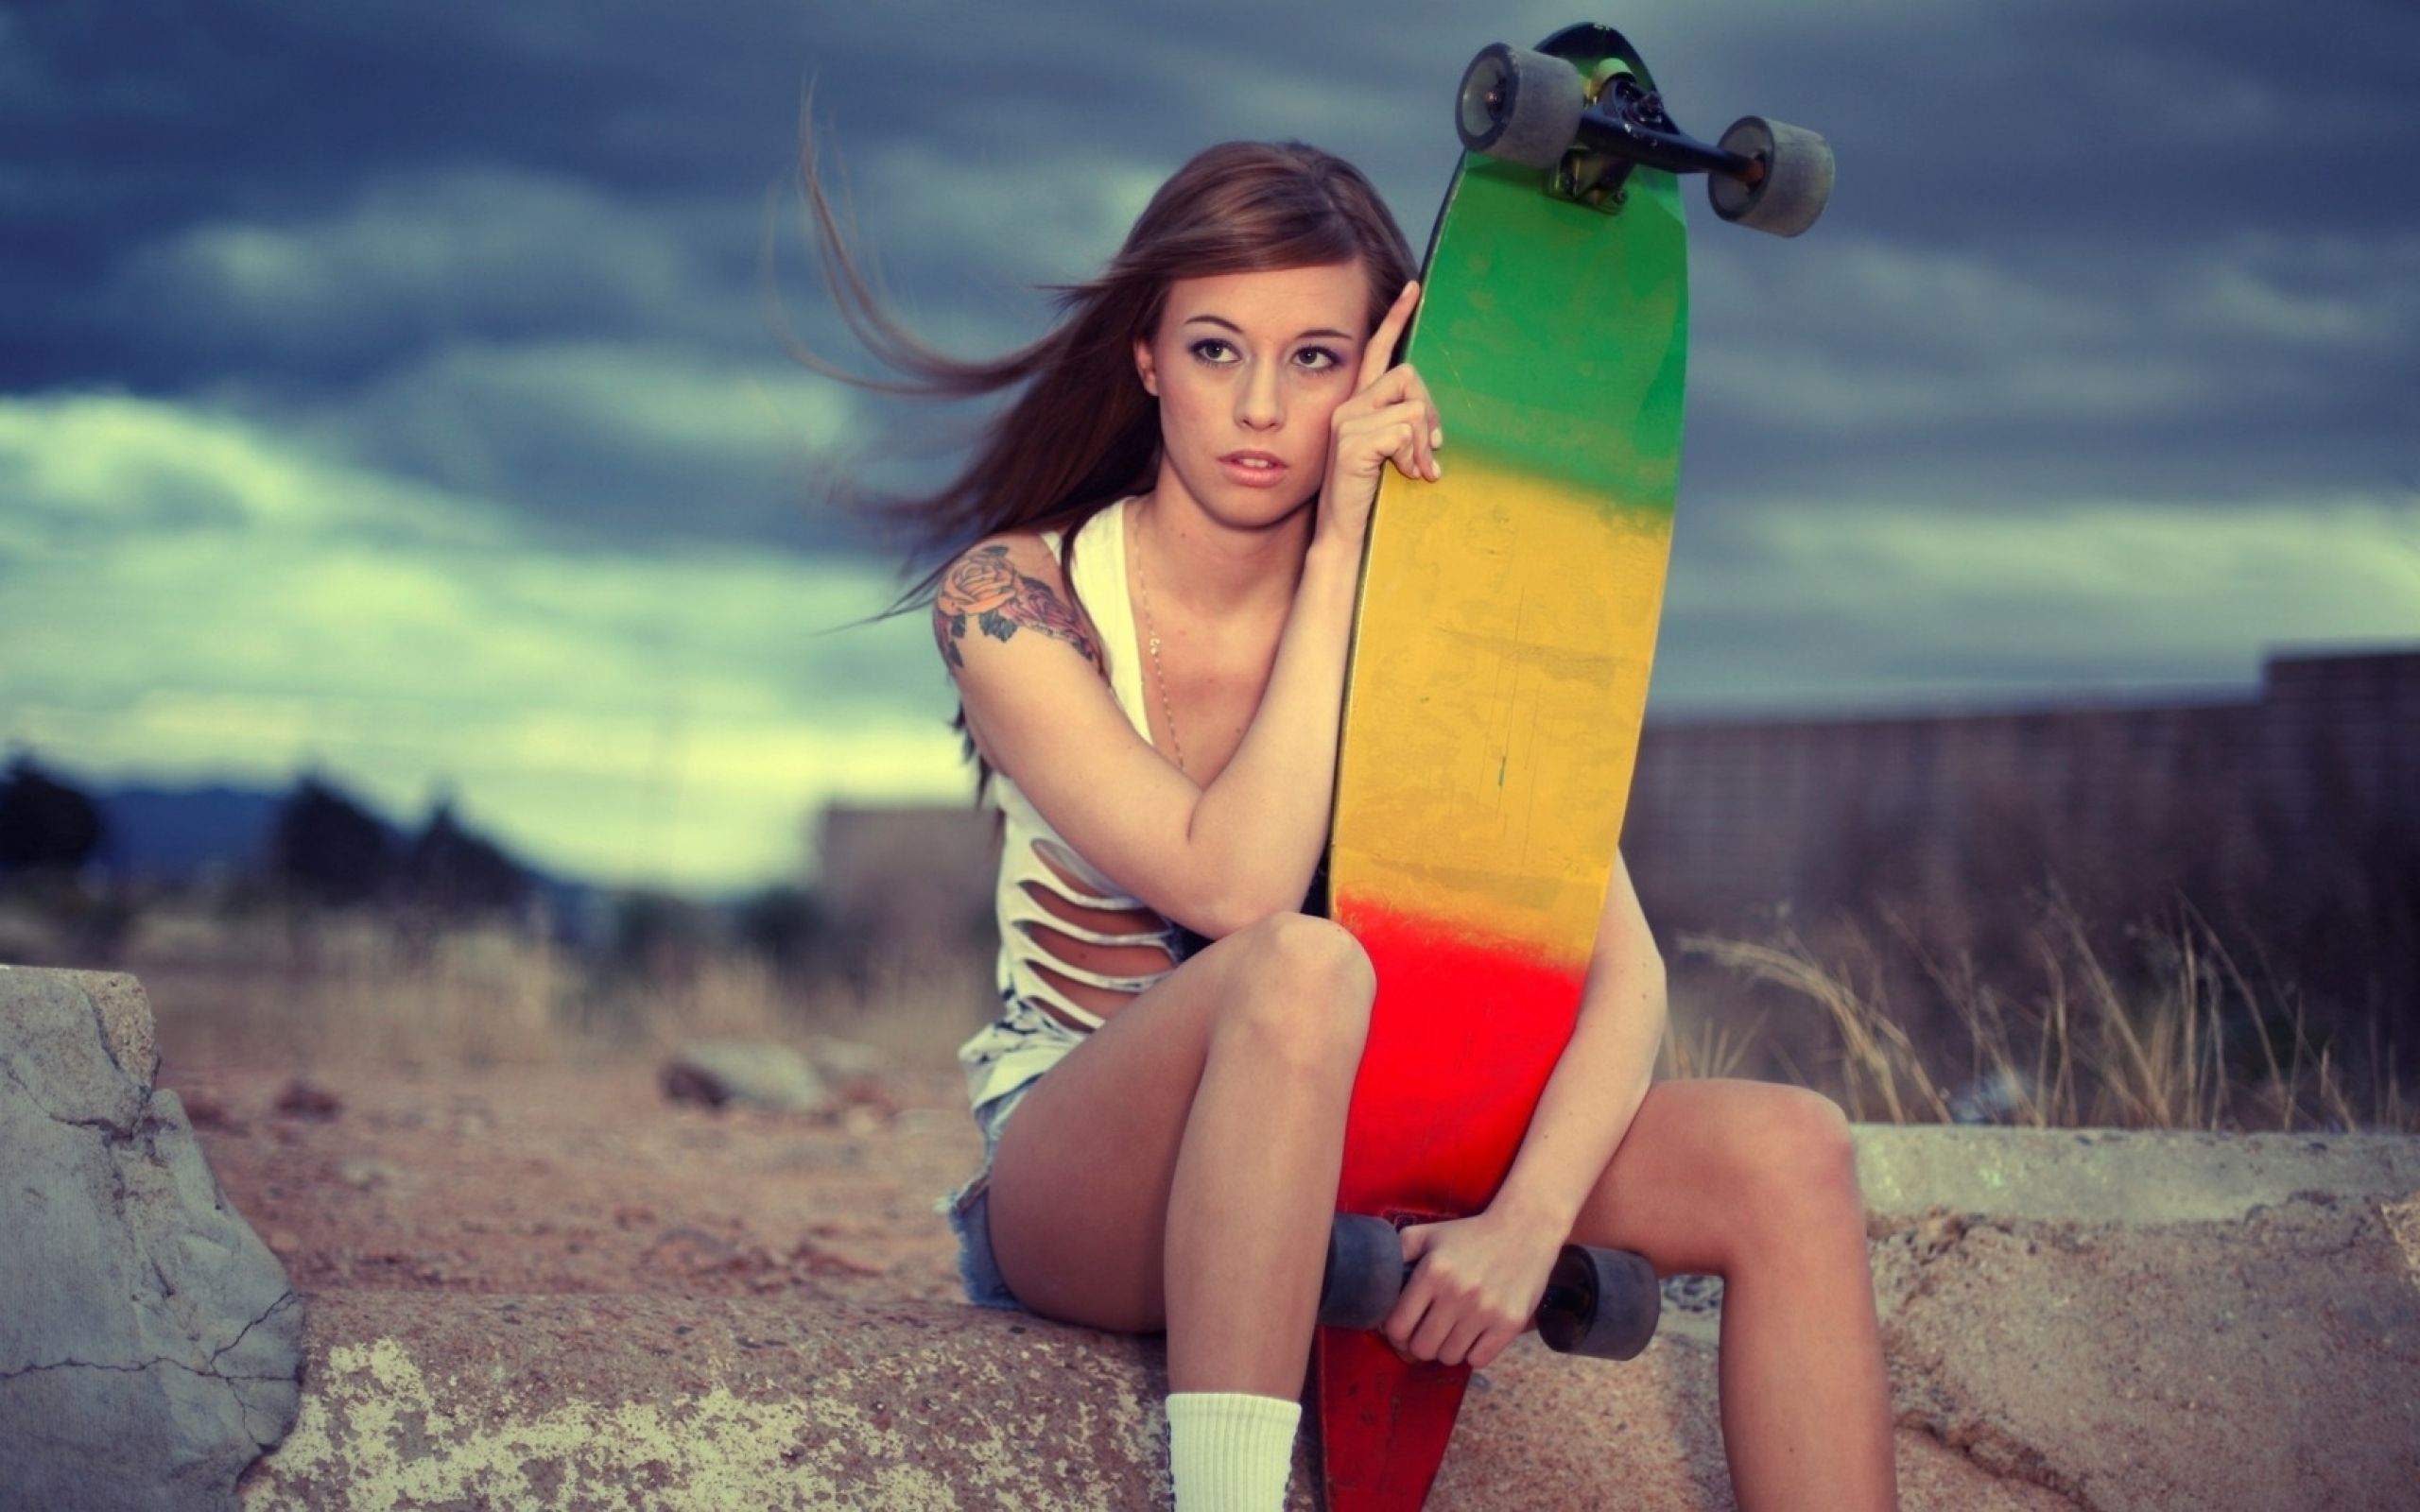 Sporty girl and skateboard wallpapers and images - wallpapers ...